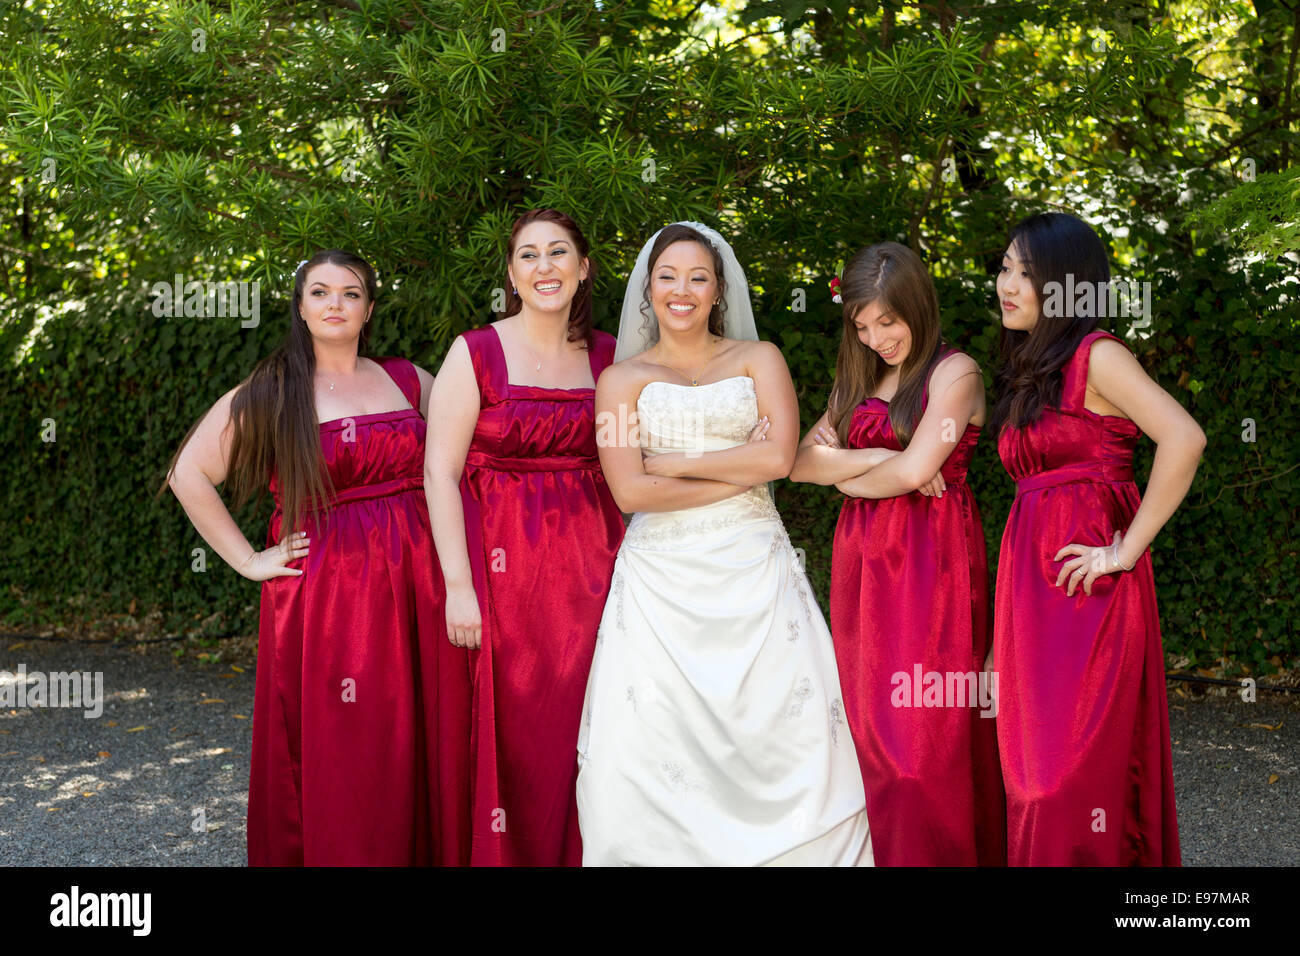 bride and bridesmaids wedding attendants wedding party wedding at Marin Art and Garden Center in Ross in Marin County in California Stock Photo